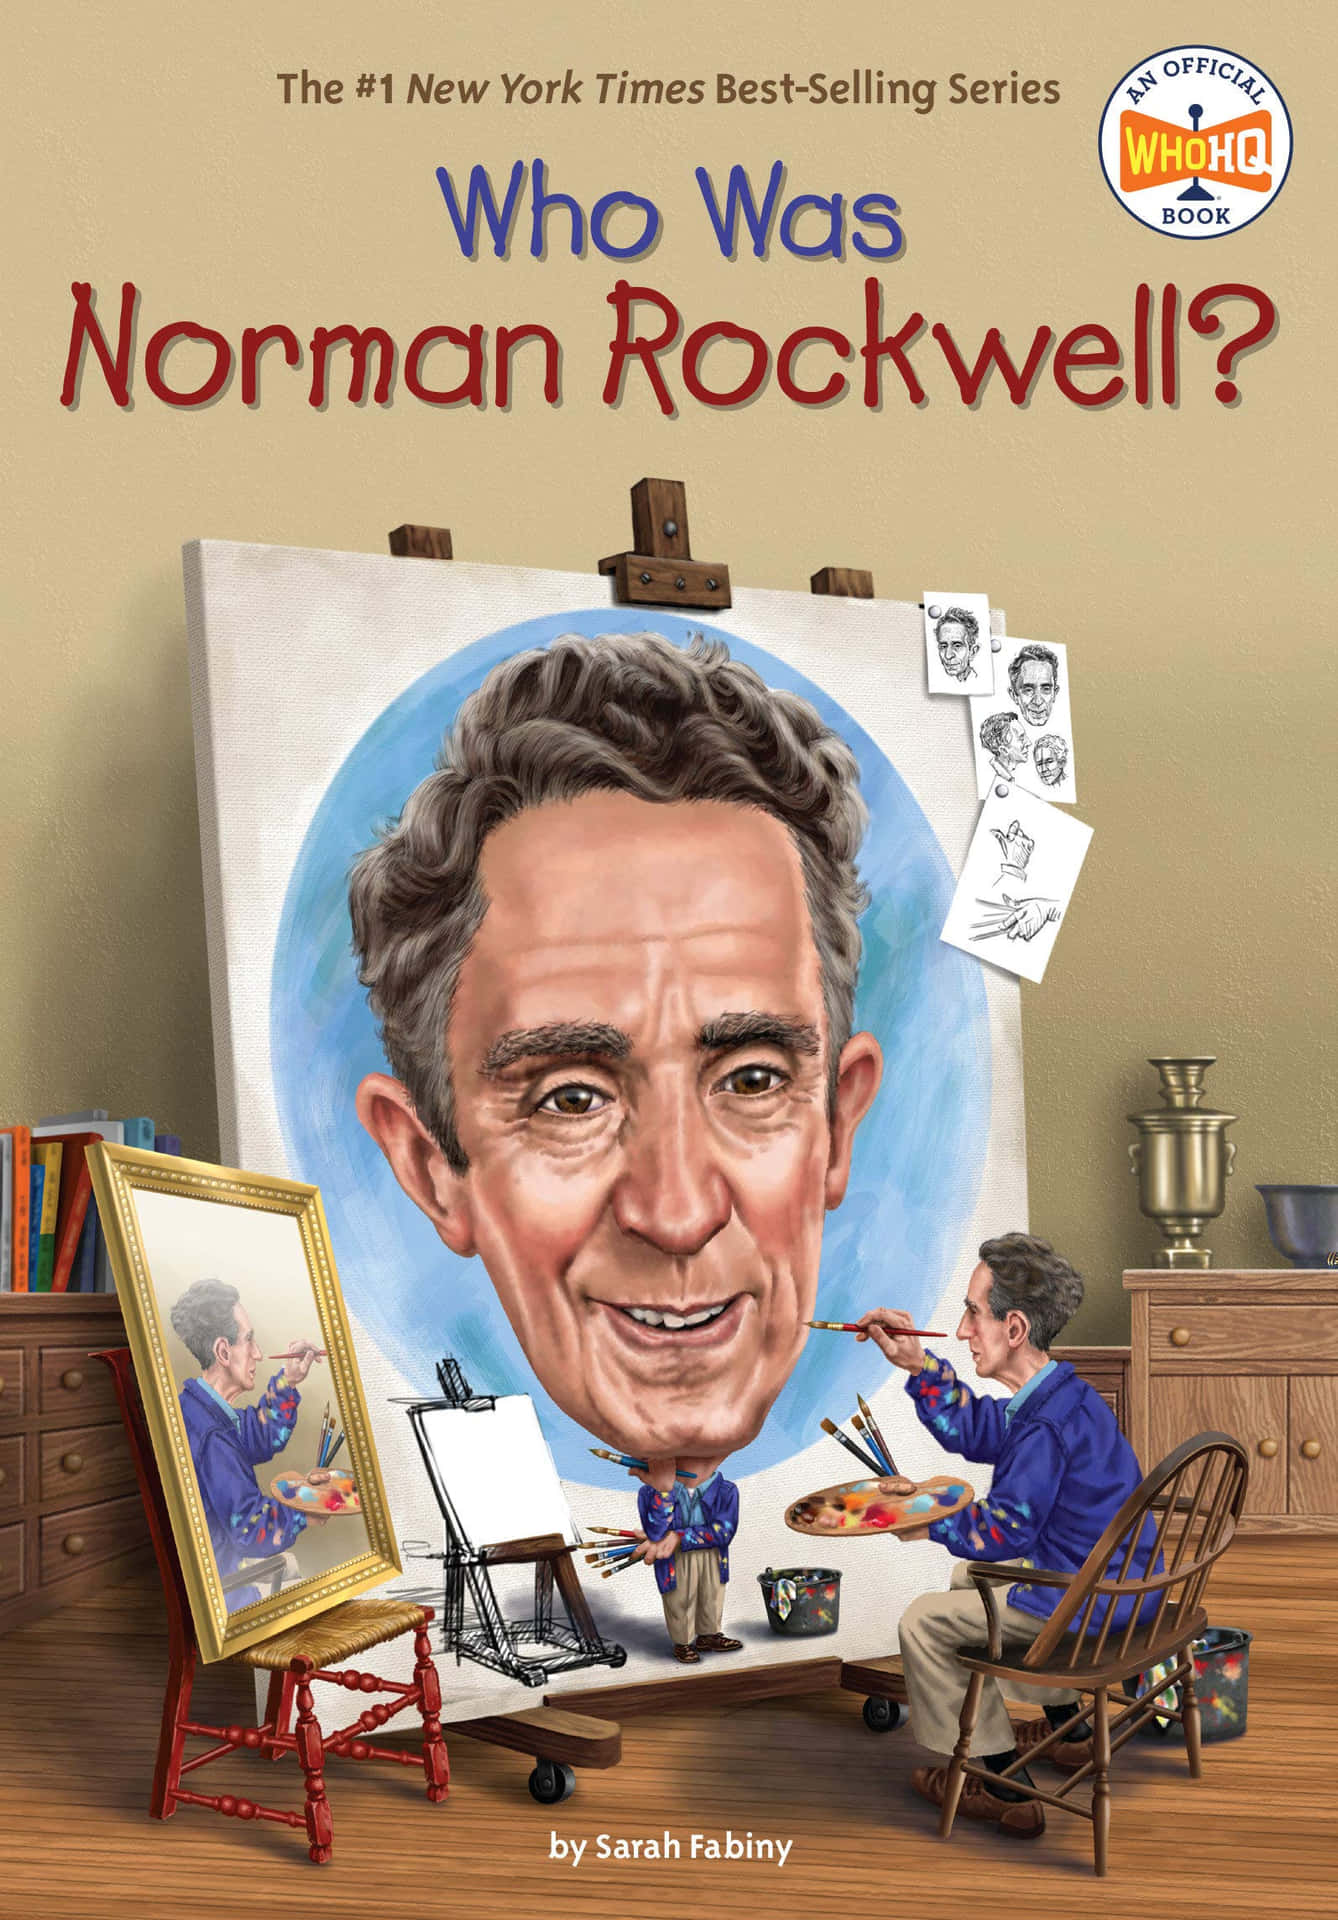 "The Life of an Artist" by Norman Rockwell